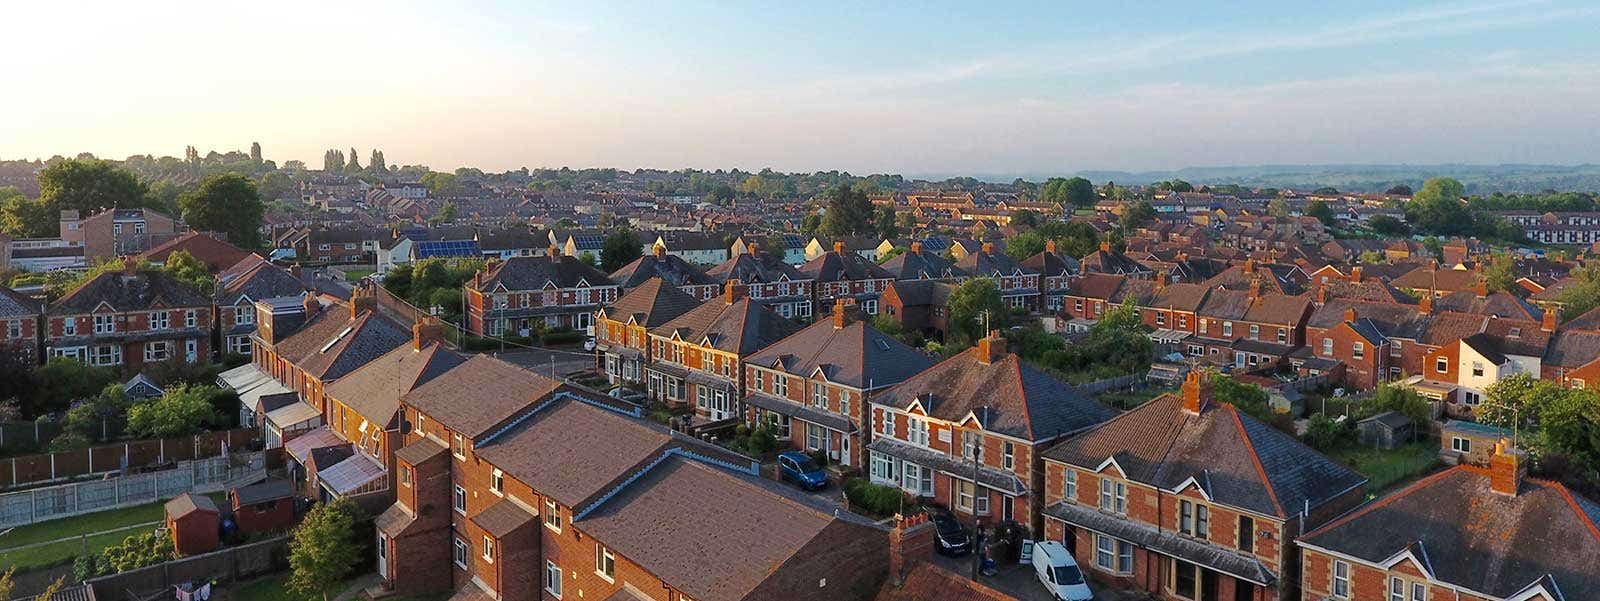 View of UK houses from above 